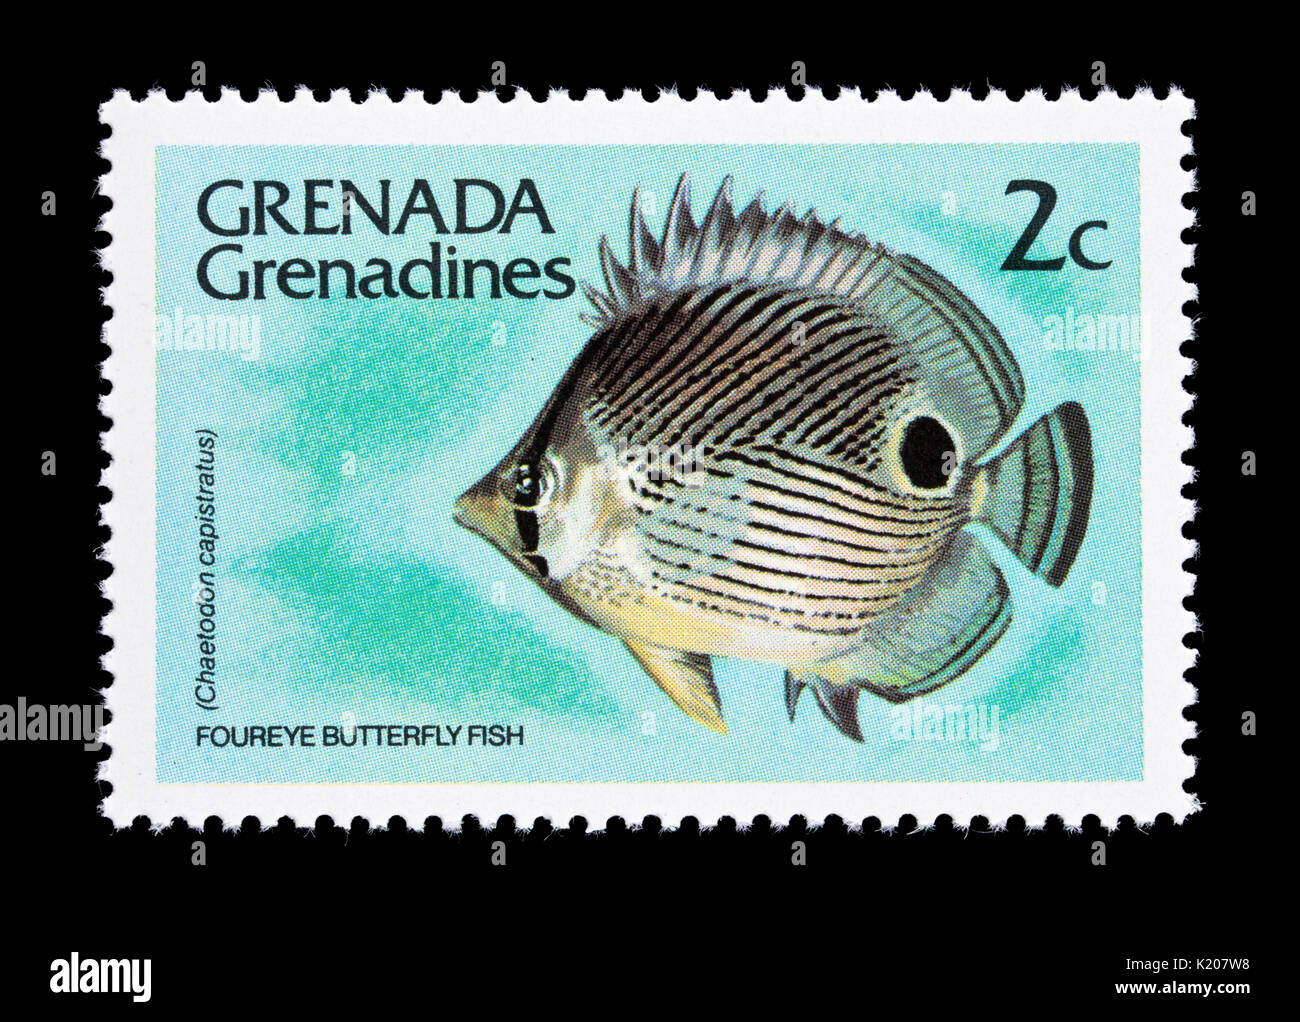 Postage stamp from Grenada Grenadines depicting a foureye butterfly fish (Chaetodon capistratus) Stock Photo